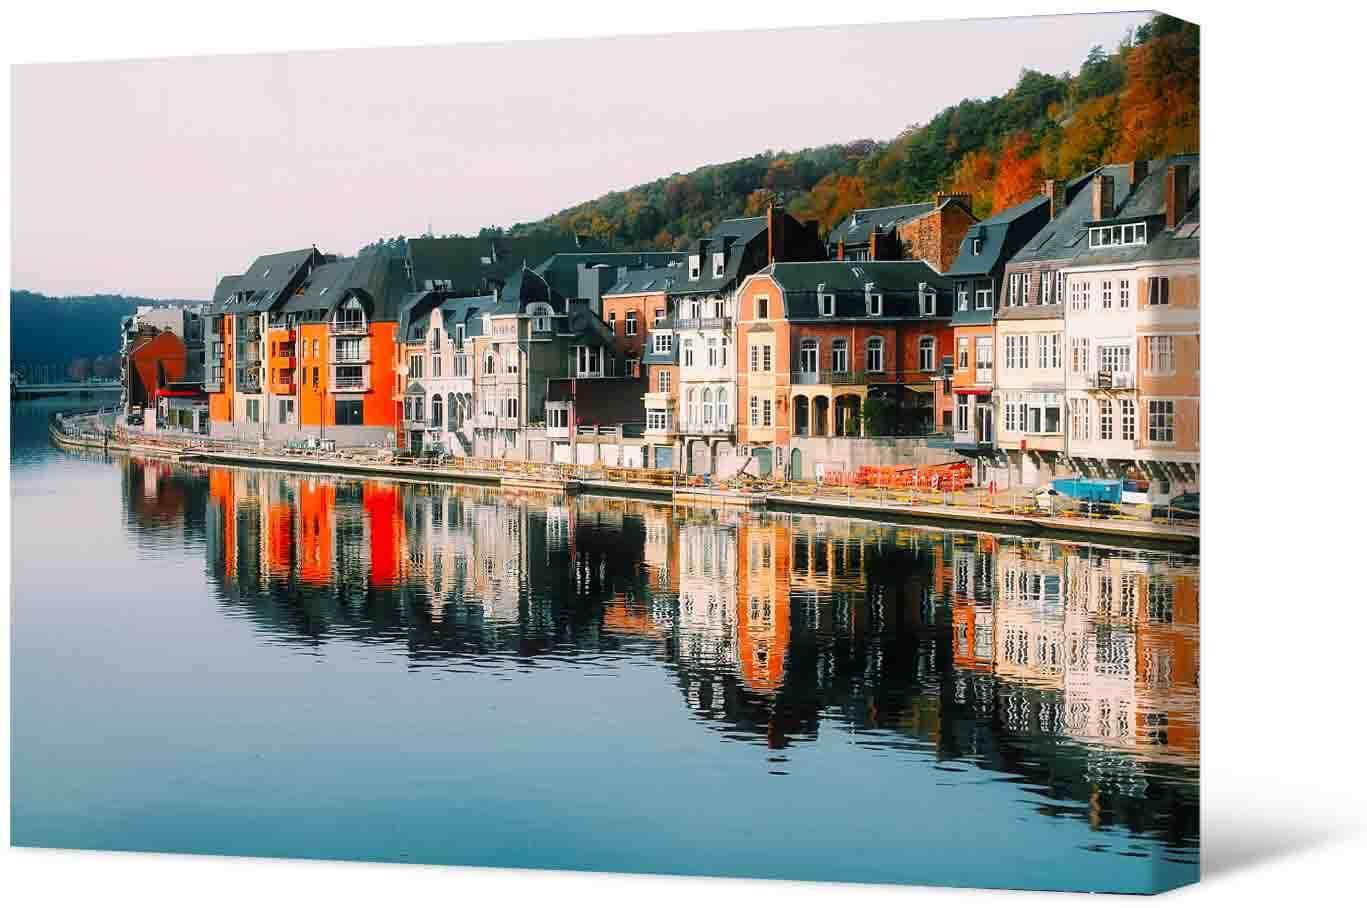 Picture Photo painting on canvas - Beautiful town near the water